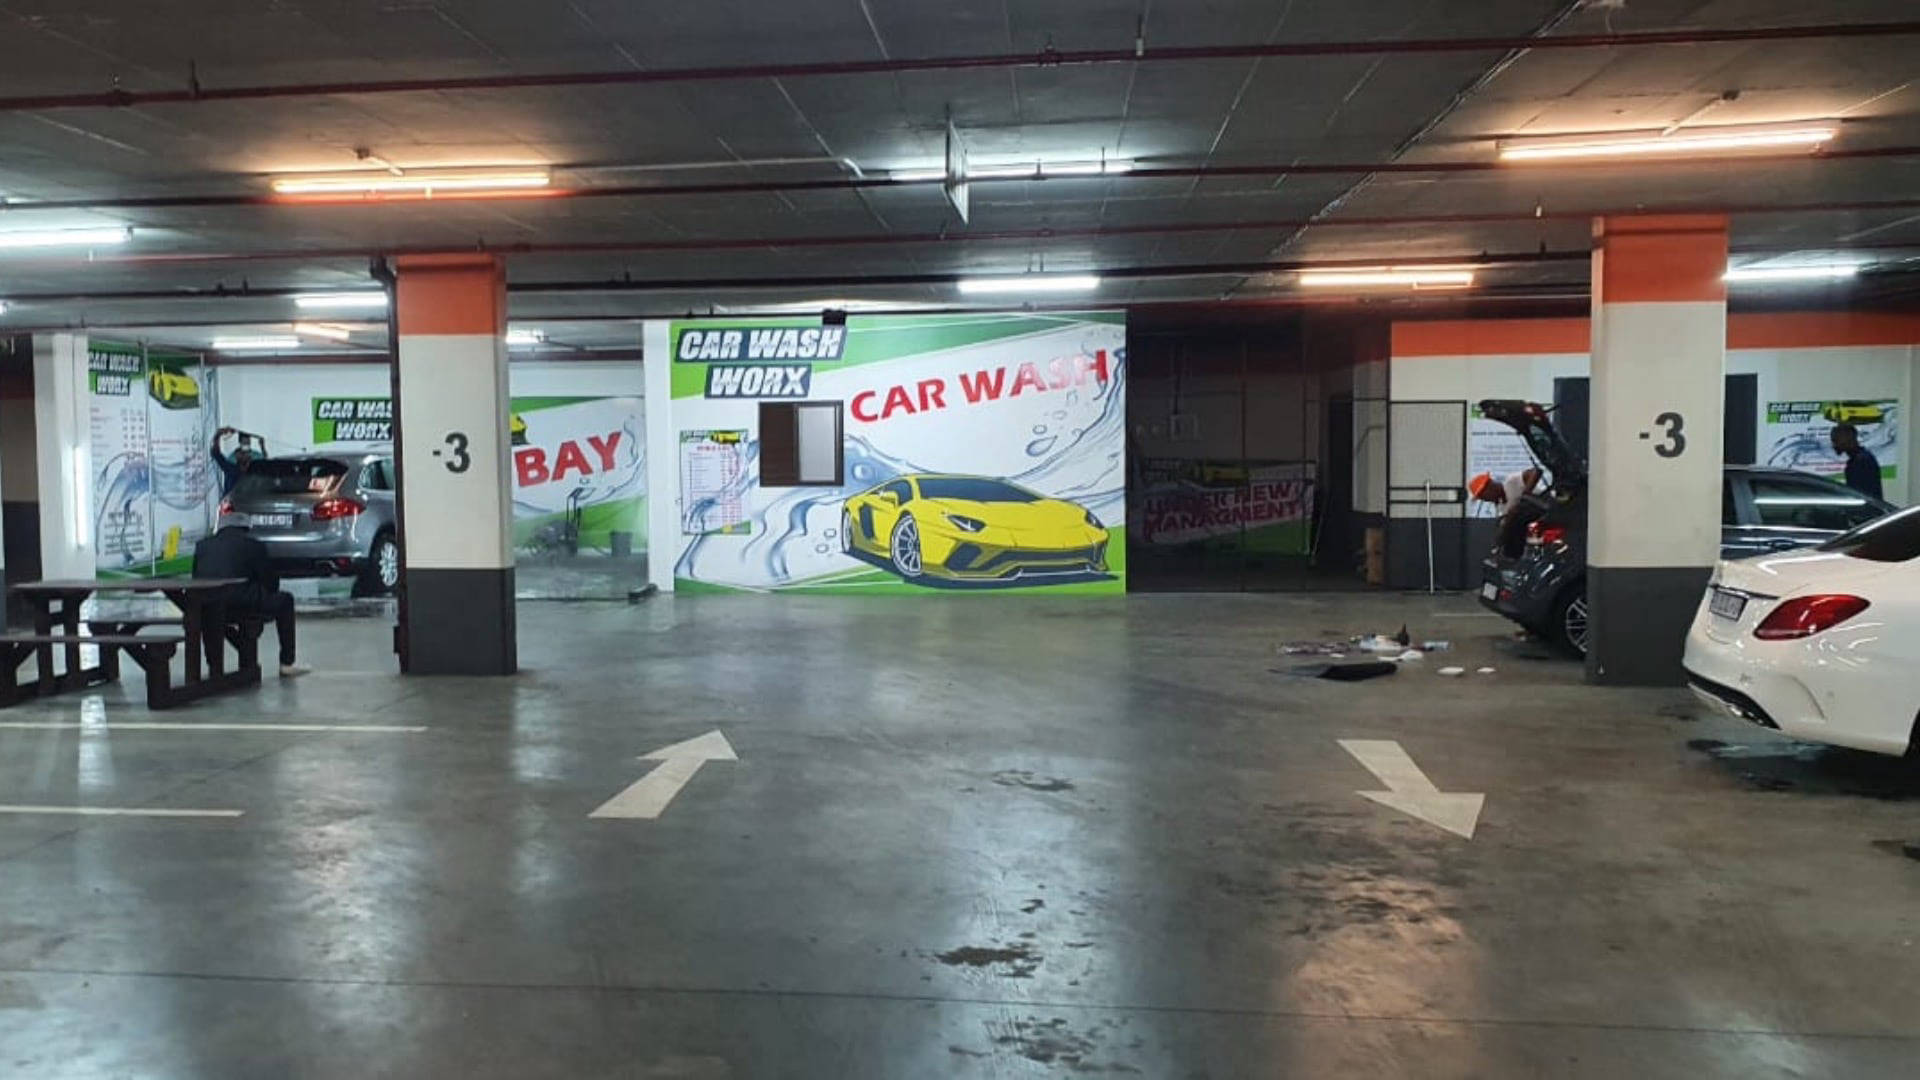 CarWash Worx Thrupps Illovo Centre Branch, Car Wash Franchises Available, CarWash Worx Head Office, Join The Leading Car Wash Franchising Group, Start Your Own Successful Car Wash Business Now